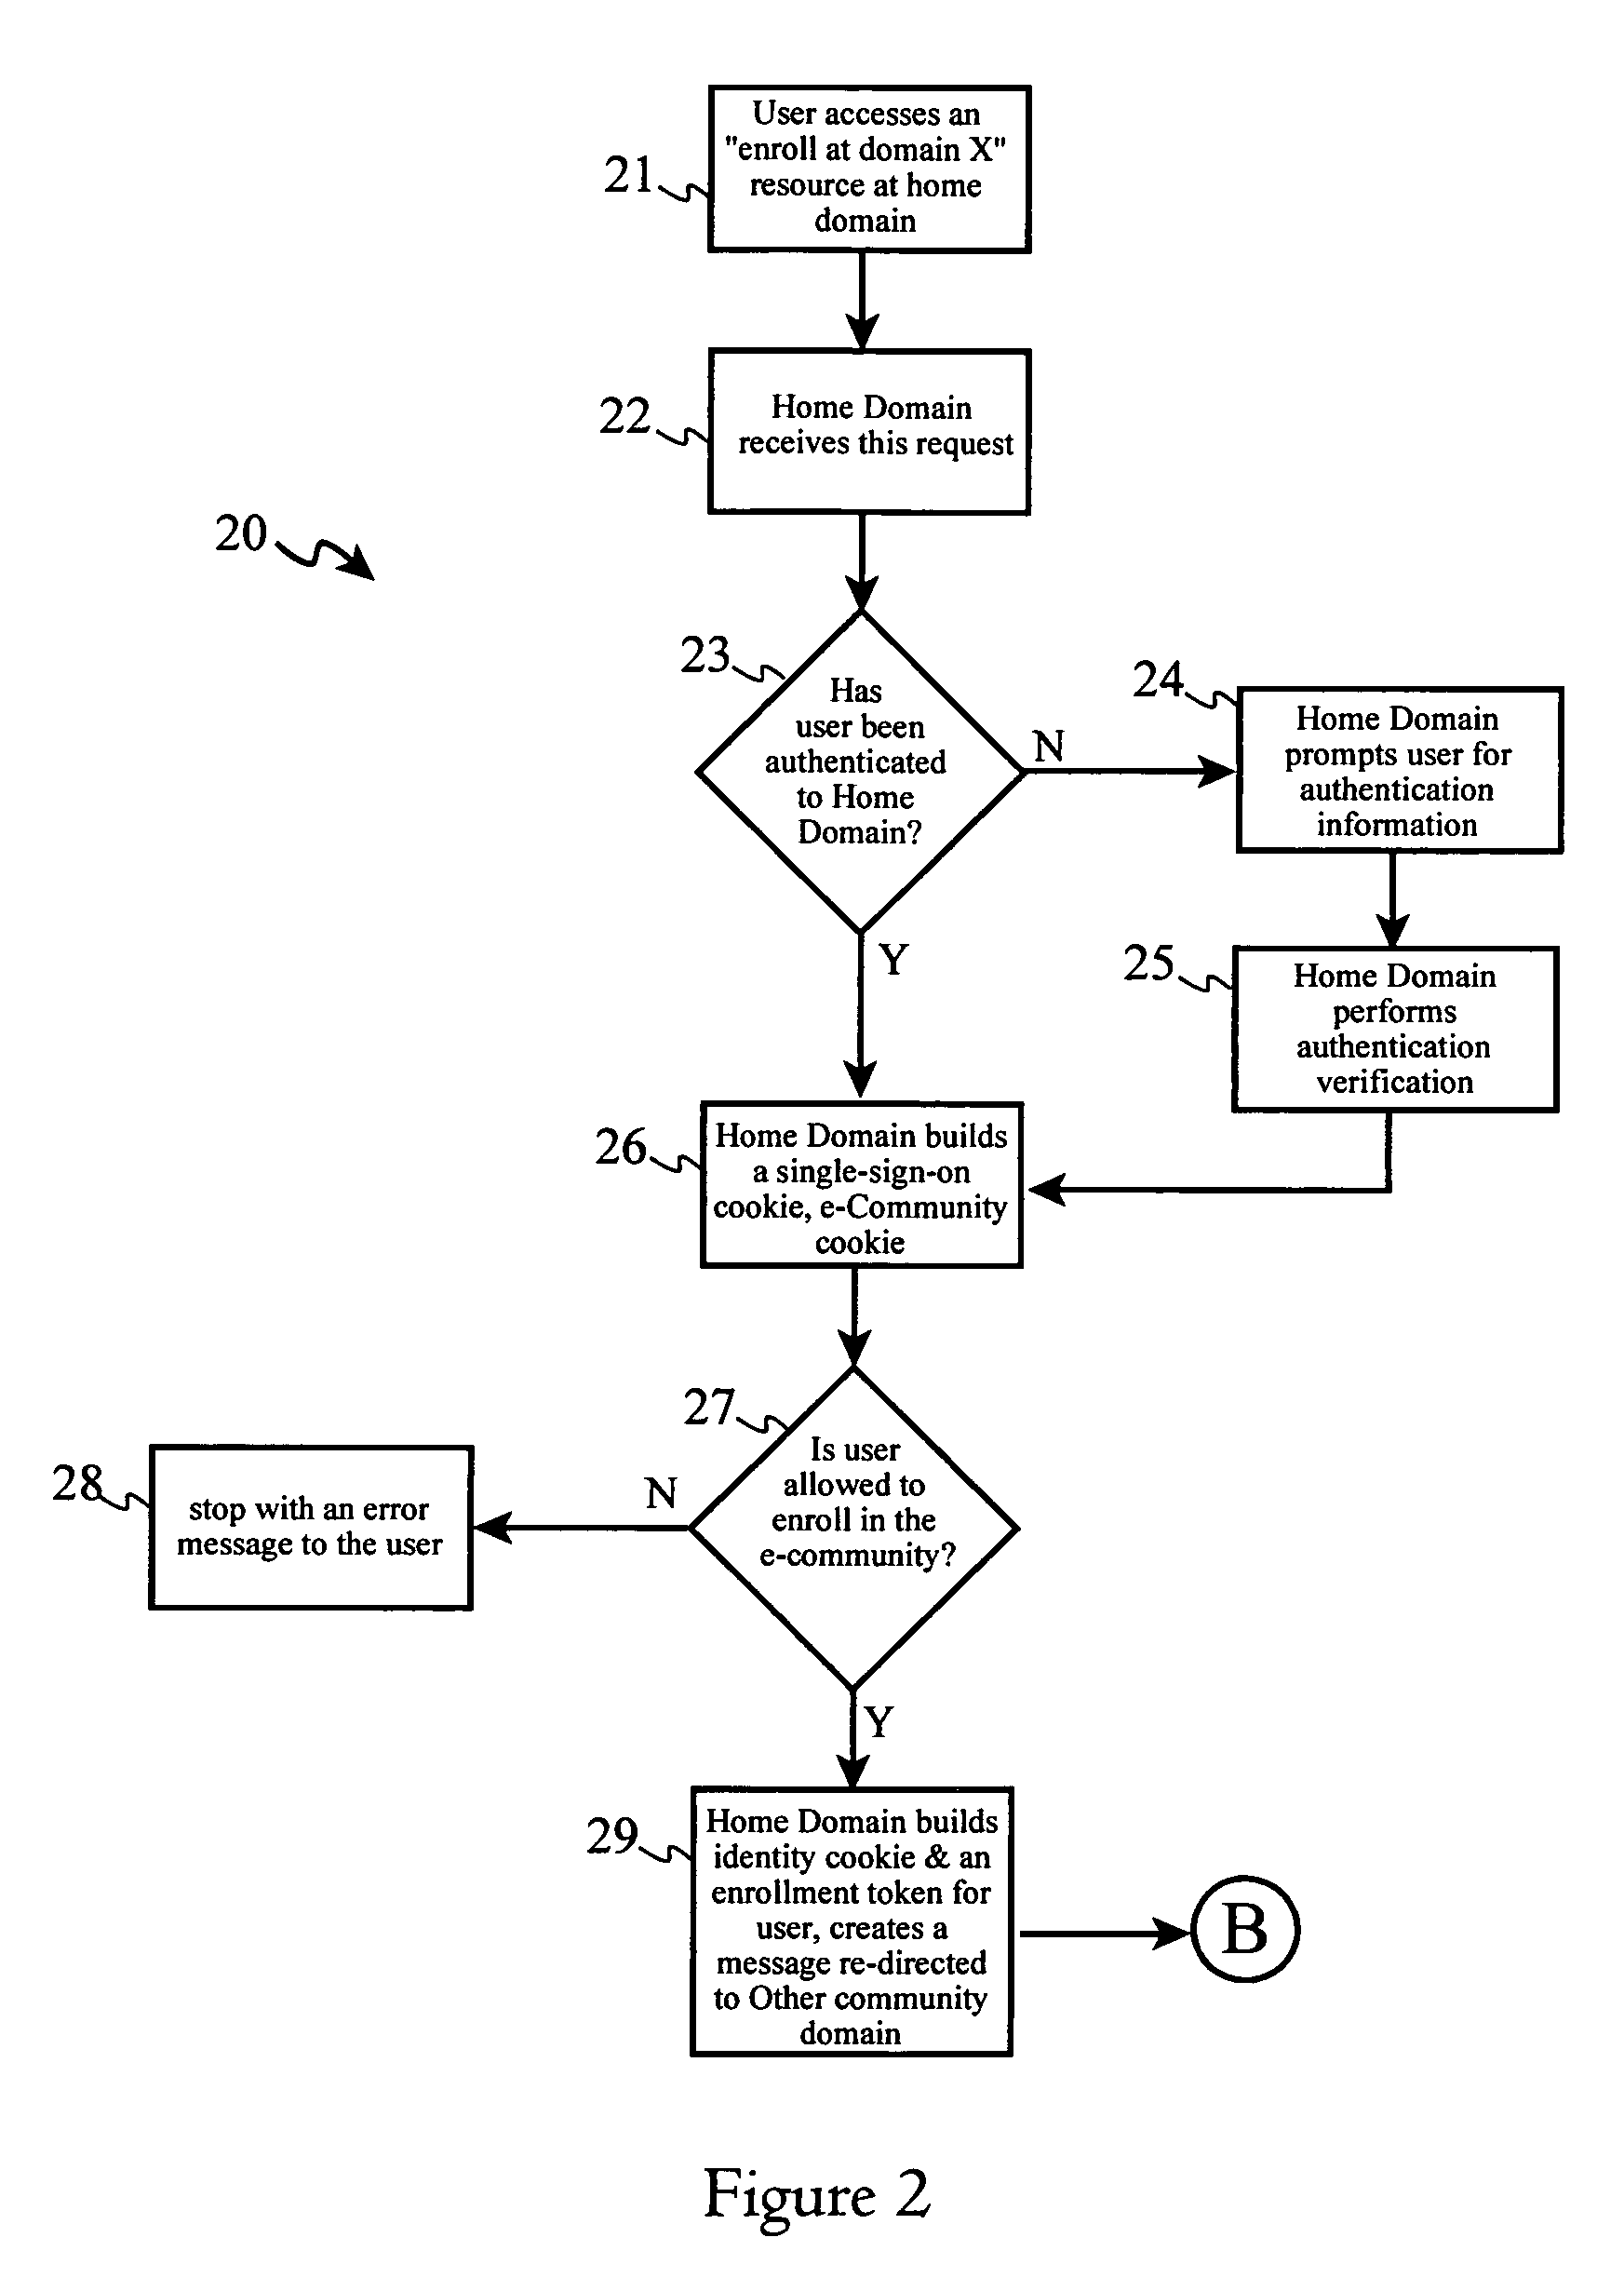 System and method for user enrollment in an e-community